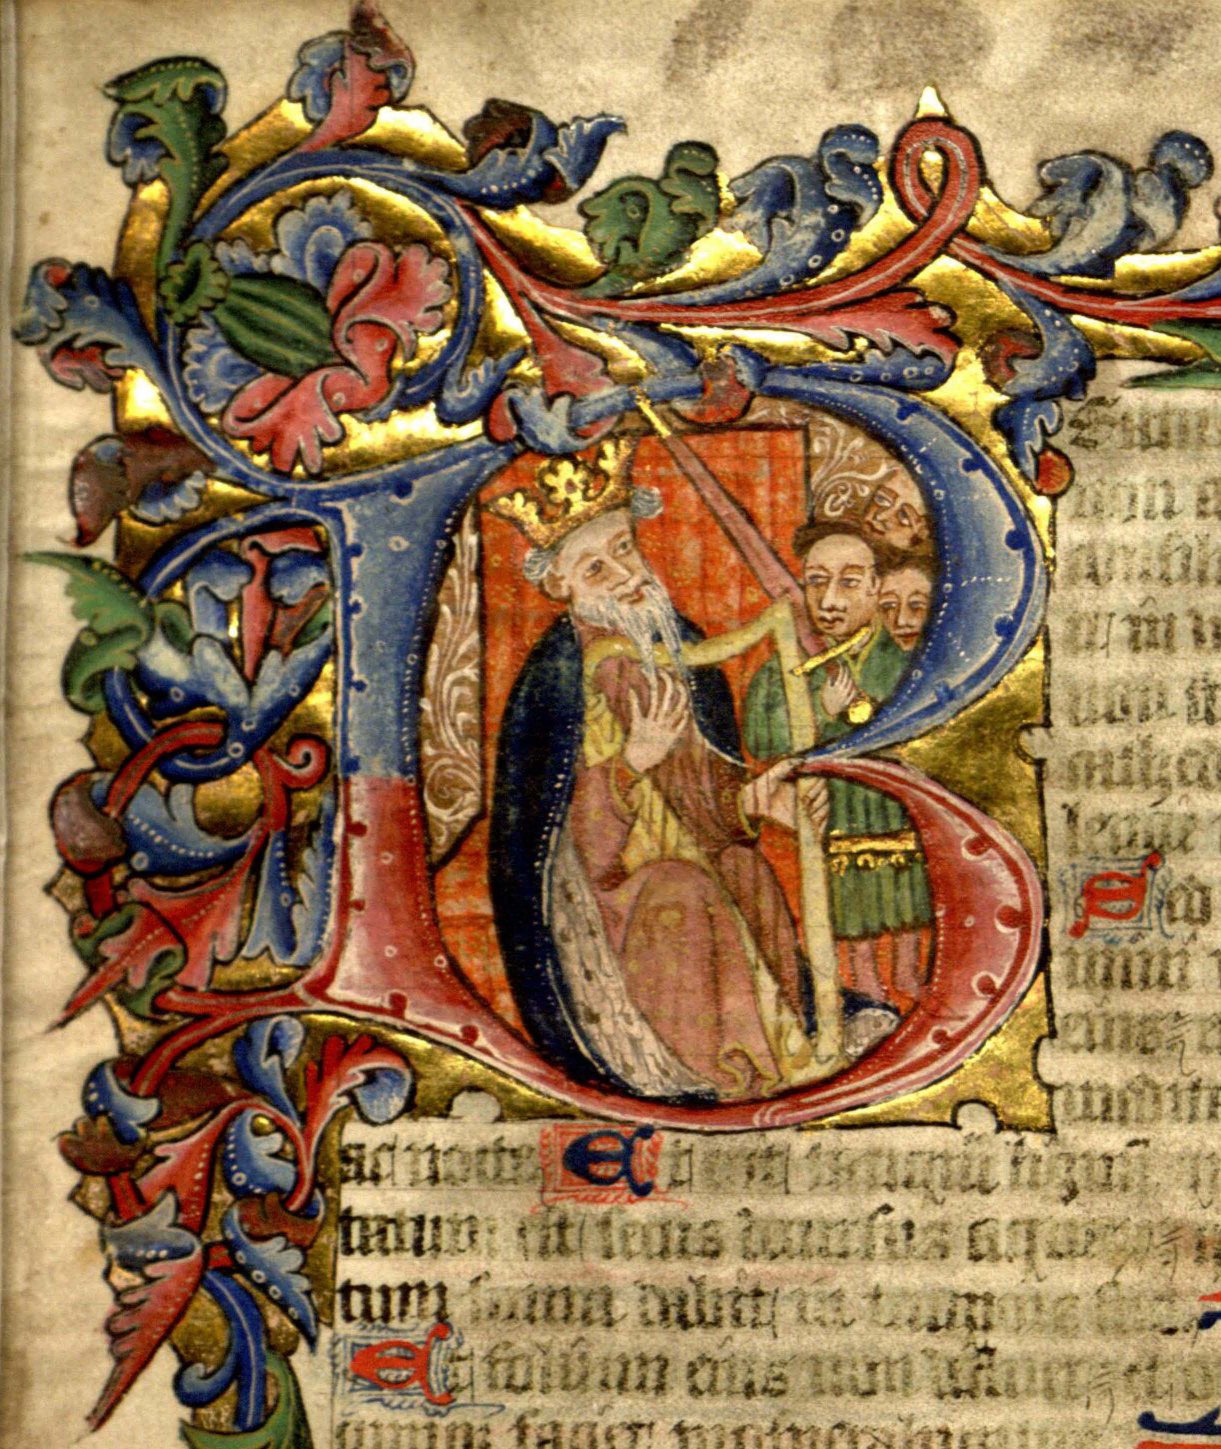 An illuminated initial of King David from a 15th century English psalter (St Andrews msBX2033.A00).